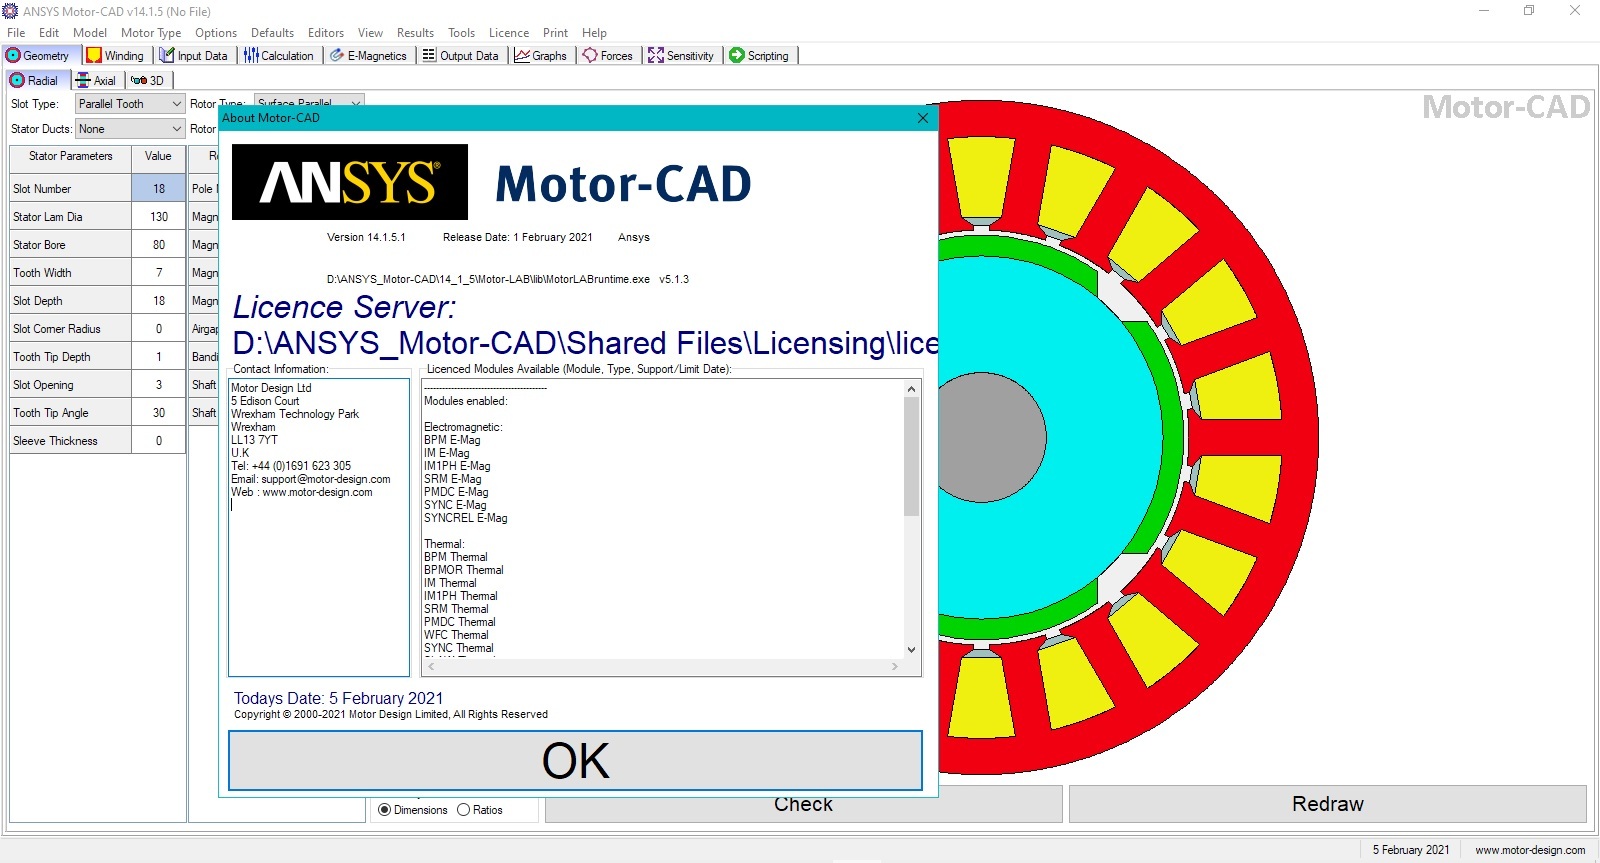 Working with ANSYS Motor-CAD 14.1.5 full